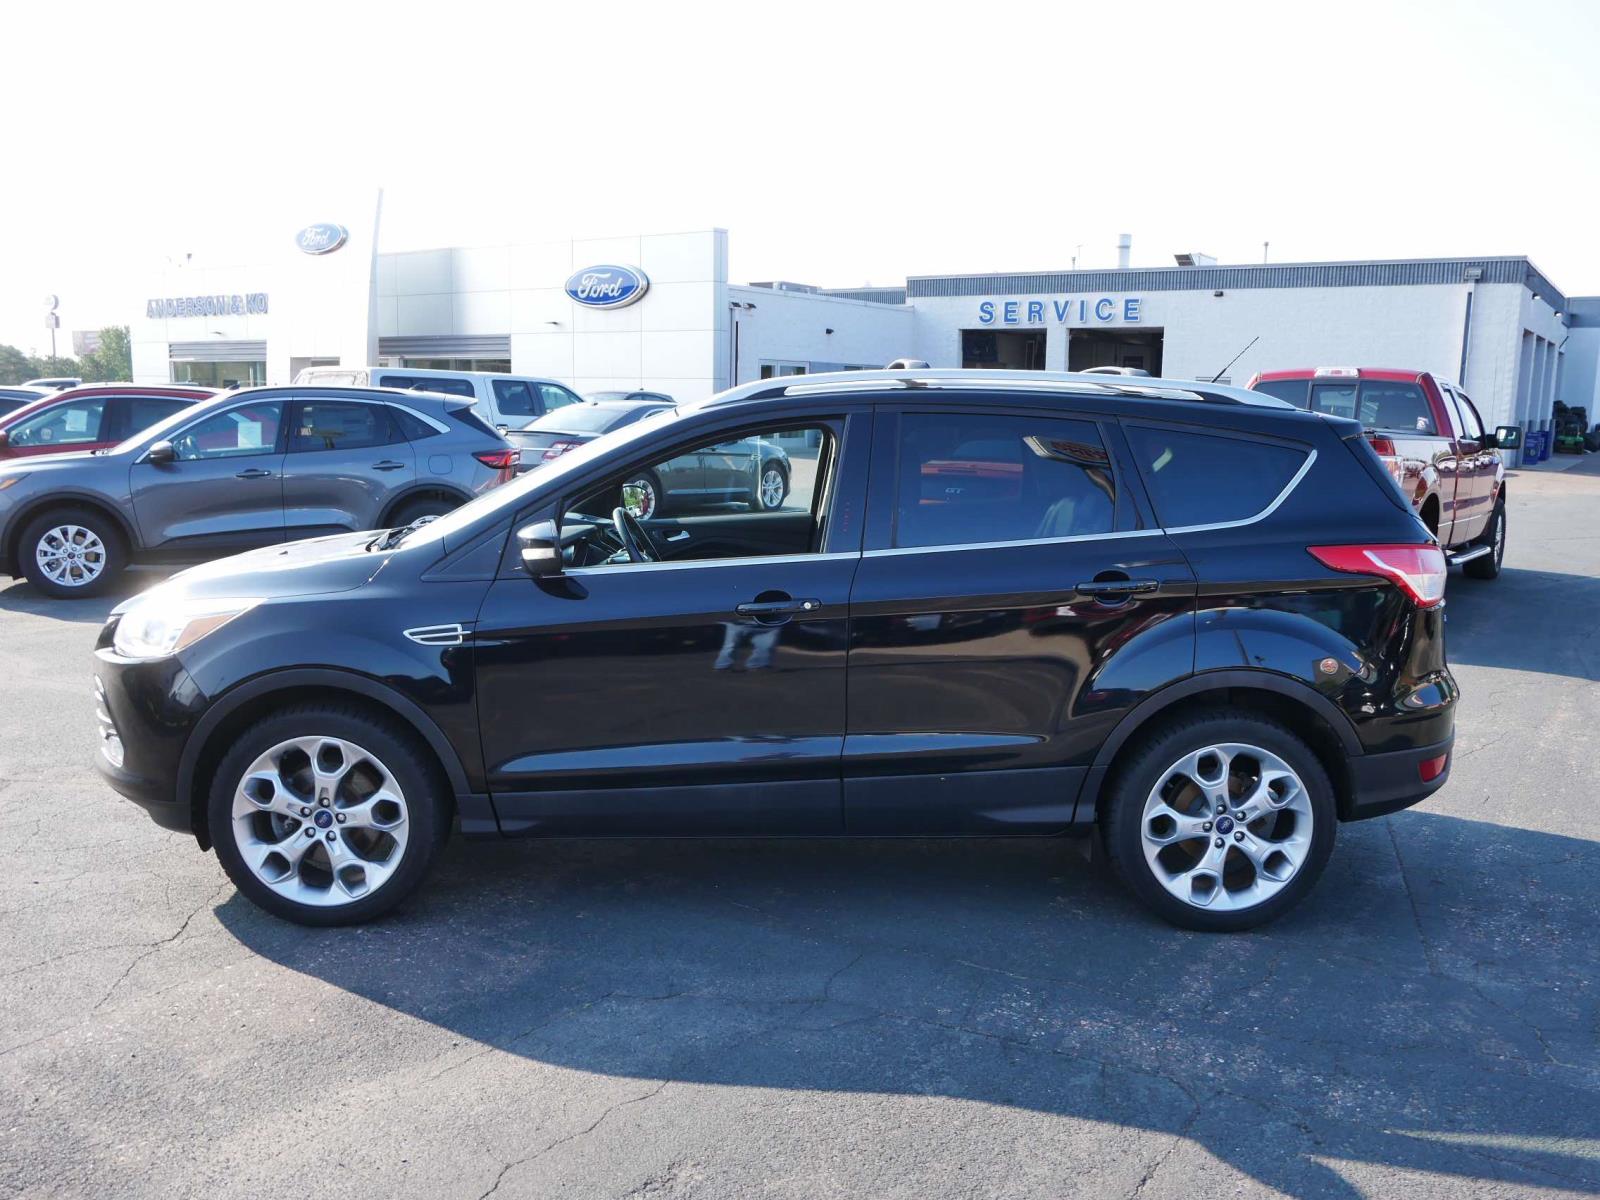 Used 2016 Ford Escape Titanium with VIN 1FMCU9J92GUB47809 for sale in Branch, Minnesota